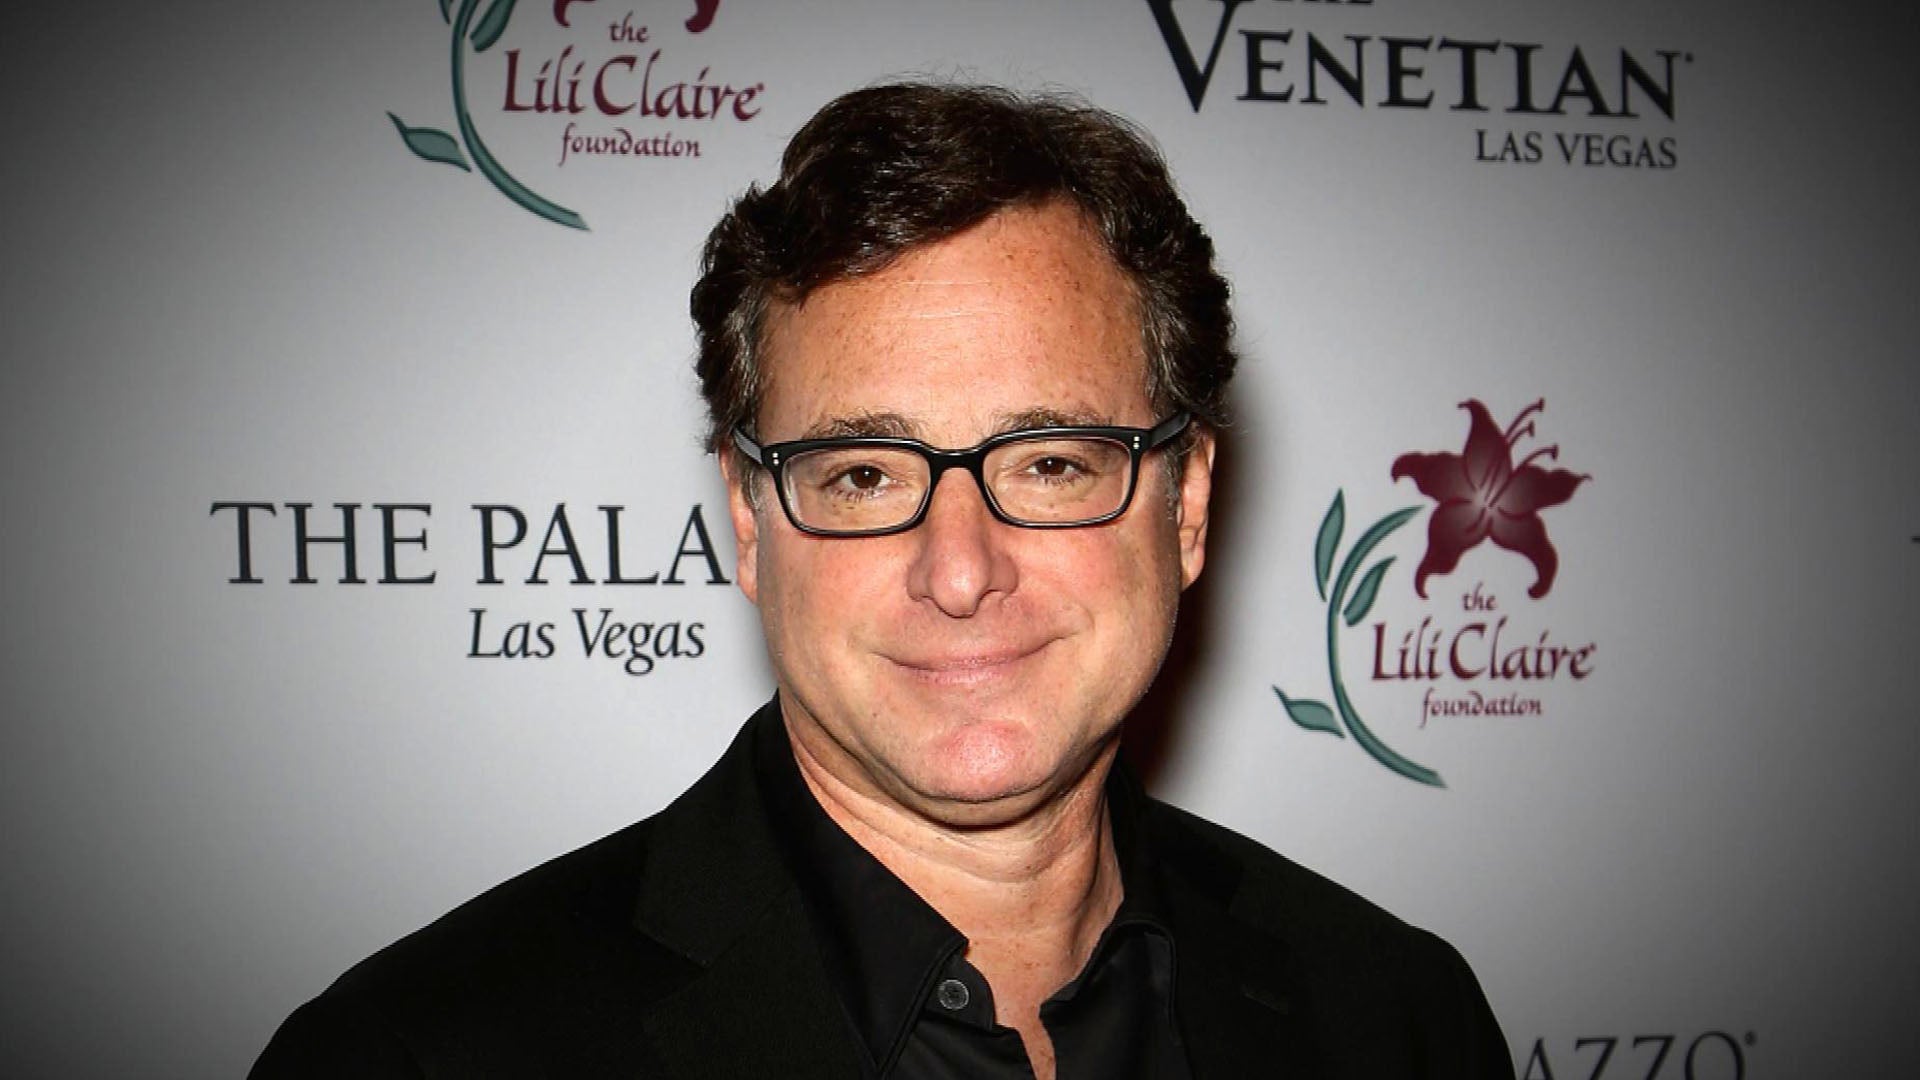 Bob Saget's Post Death Photo To Be Permanently Sealed From Public Viewing